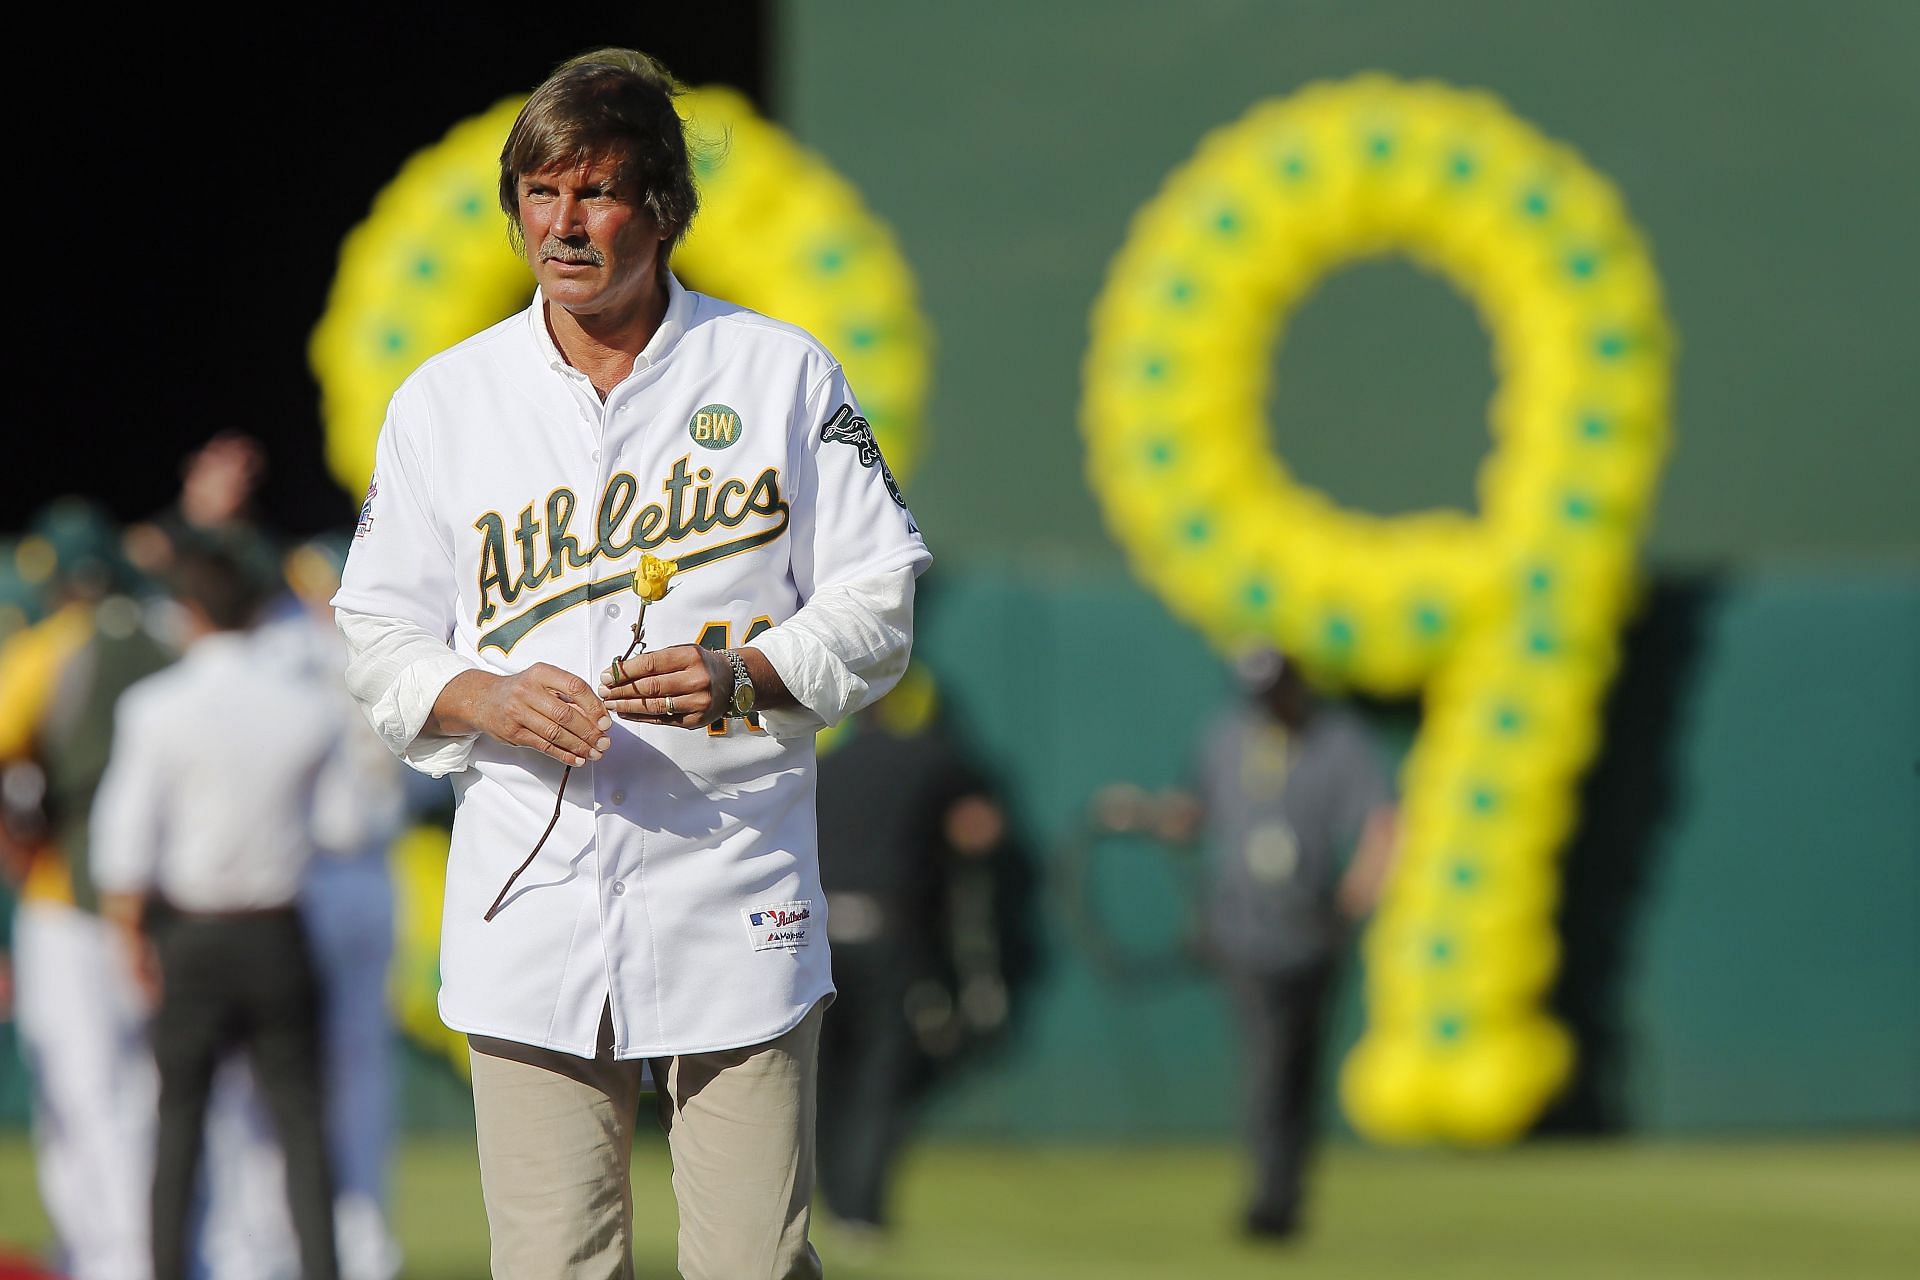 Dennis Eckersley on closing: “I don't want to take away anything